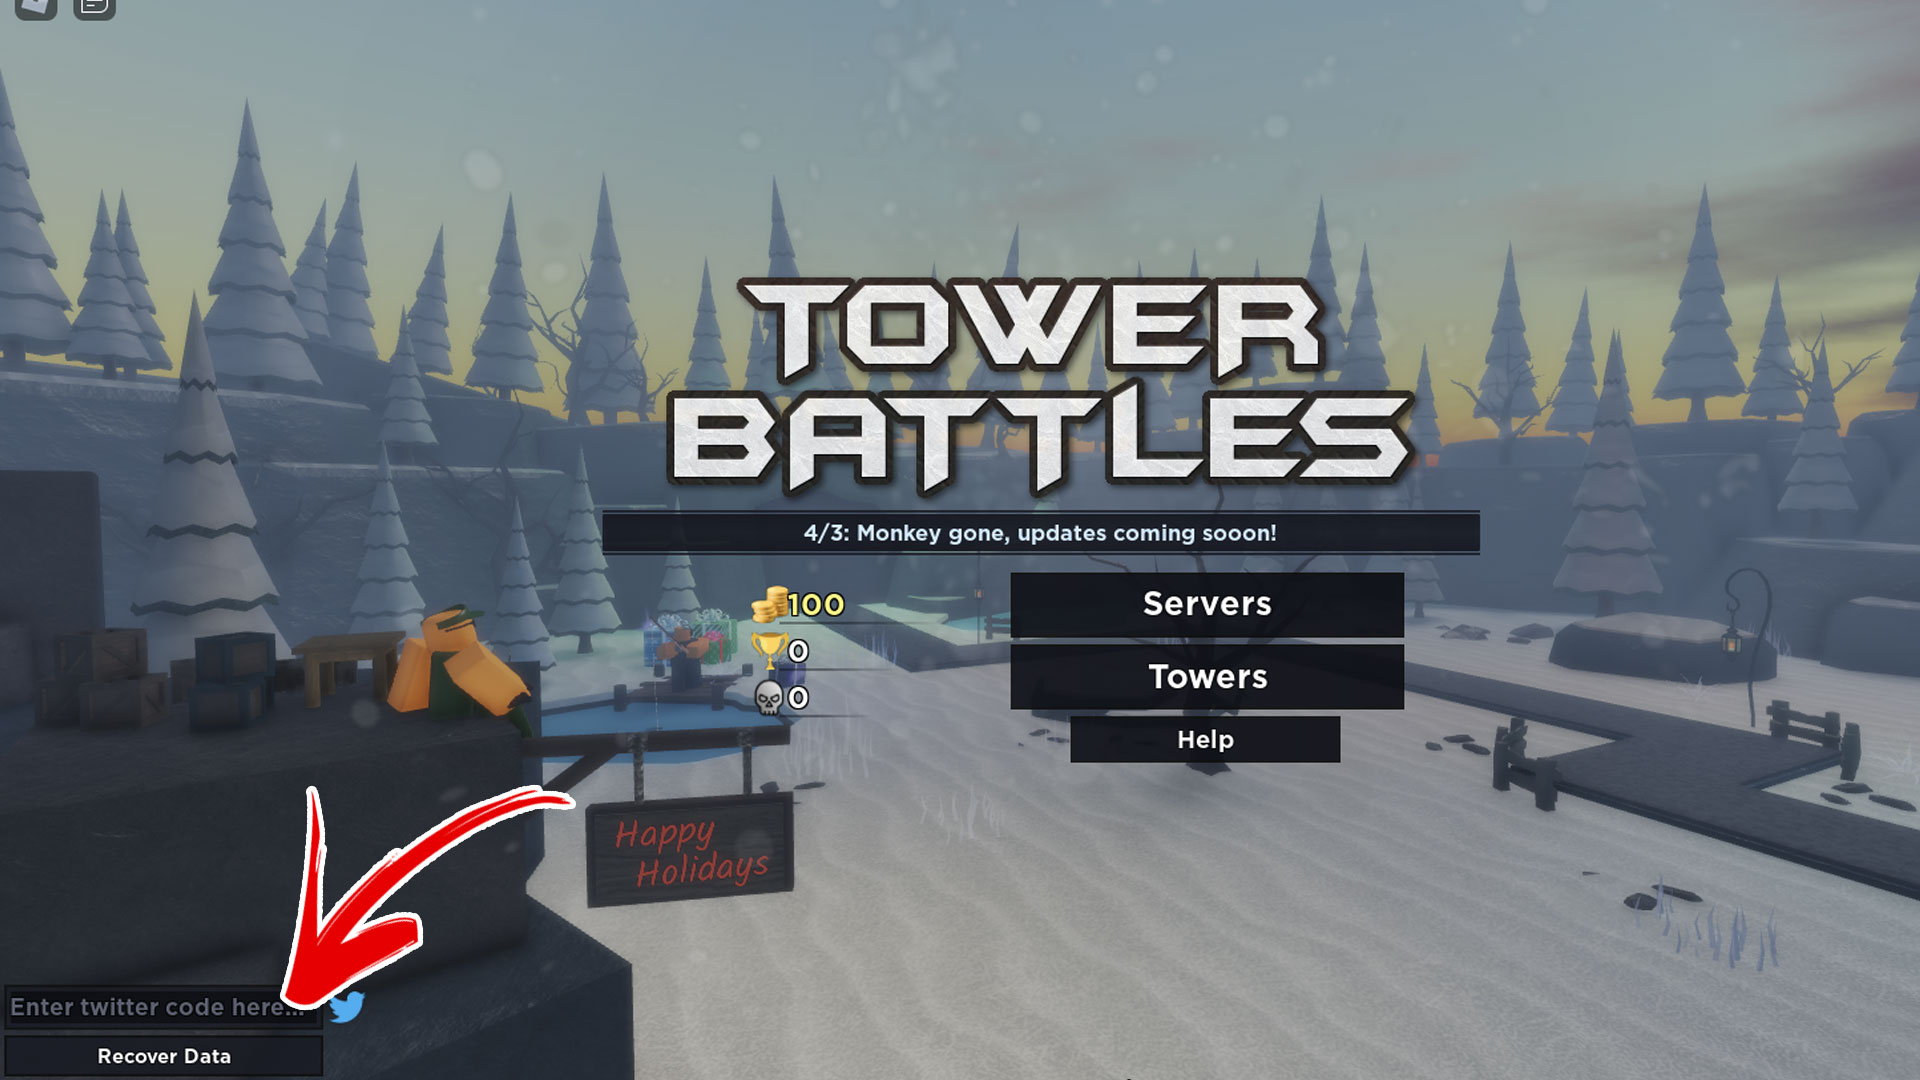 How to redeem Tower Battles codes